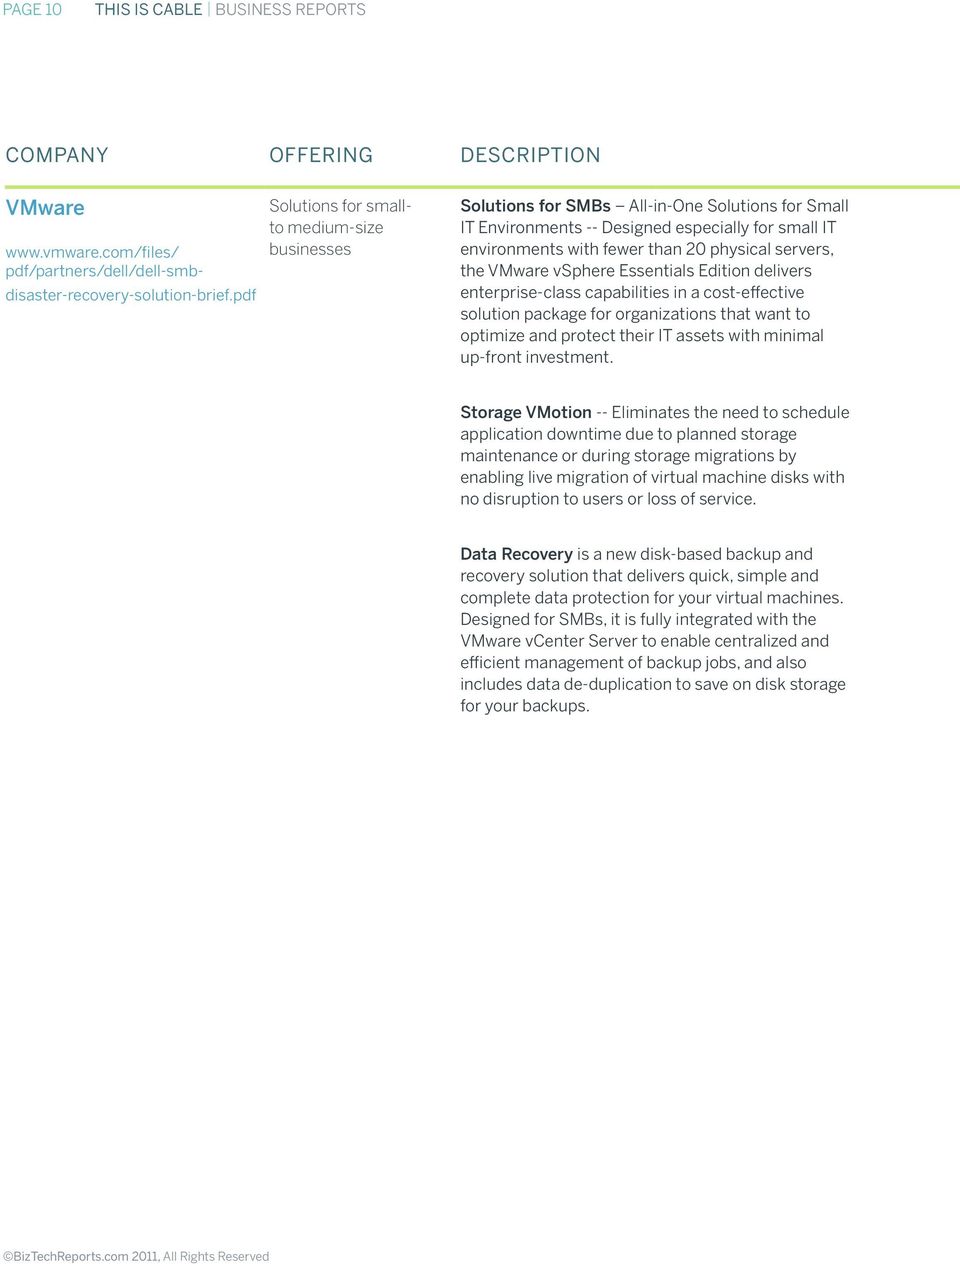 servers, the VMware vsphere Essentials Edition delivers enterprise-class capabilities in a cost-effective solution package for organizations that want to optimize and protect their IT assets with